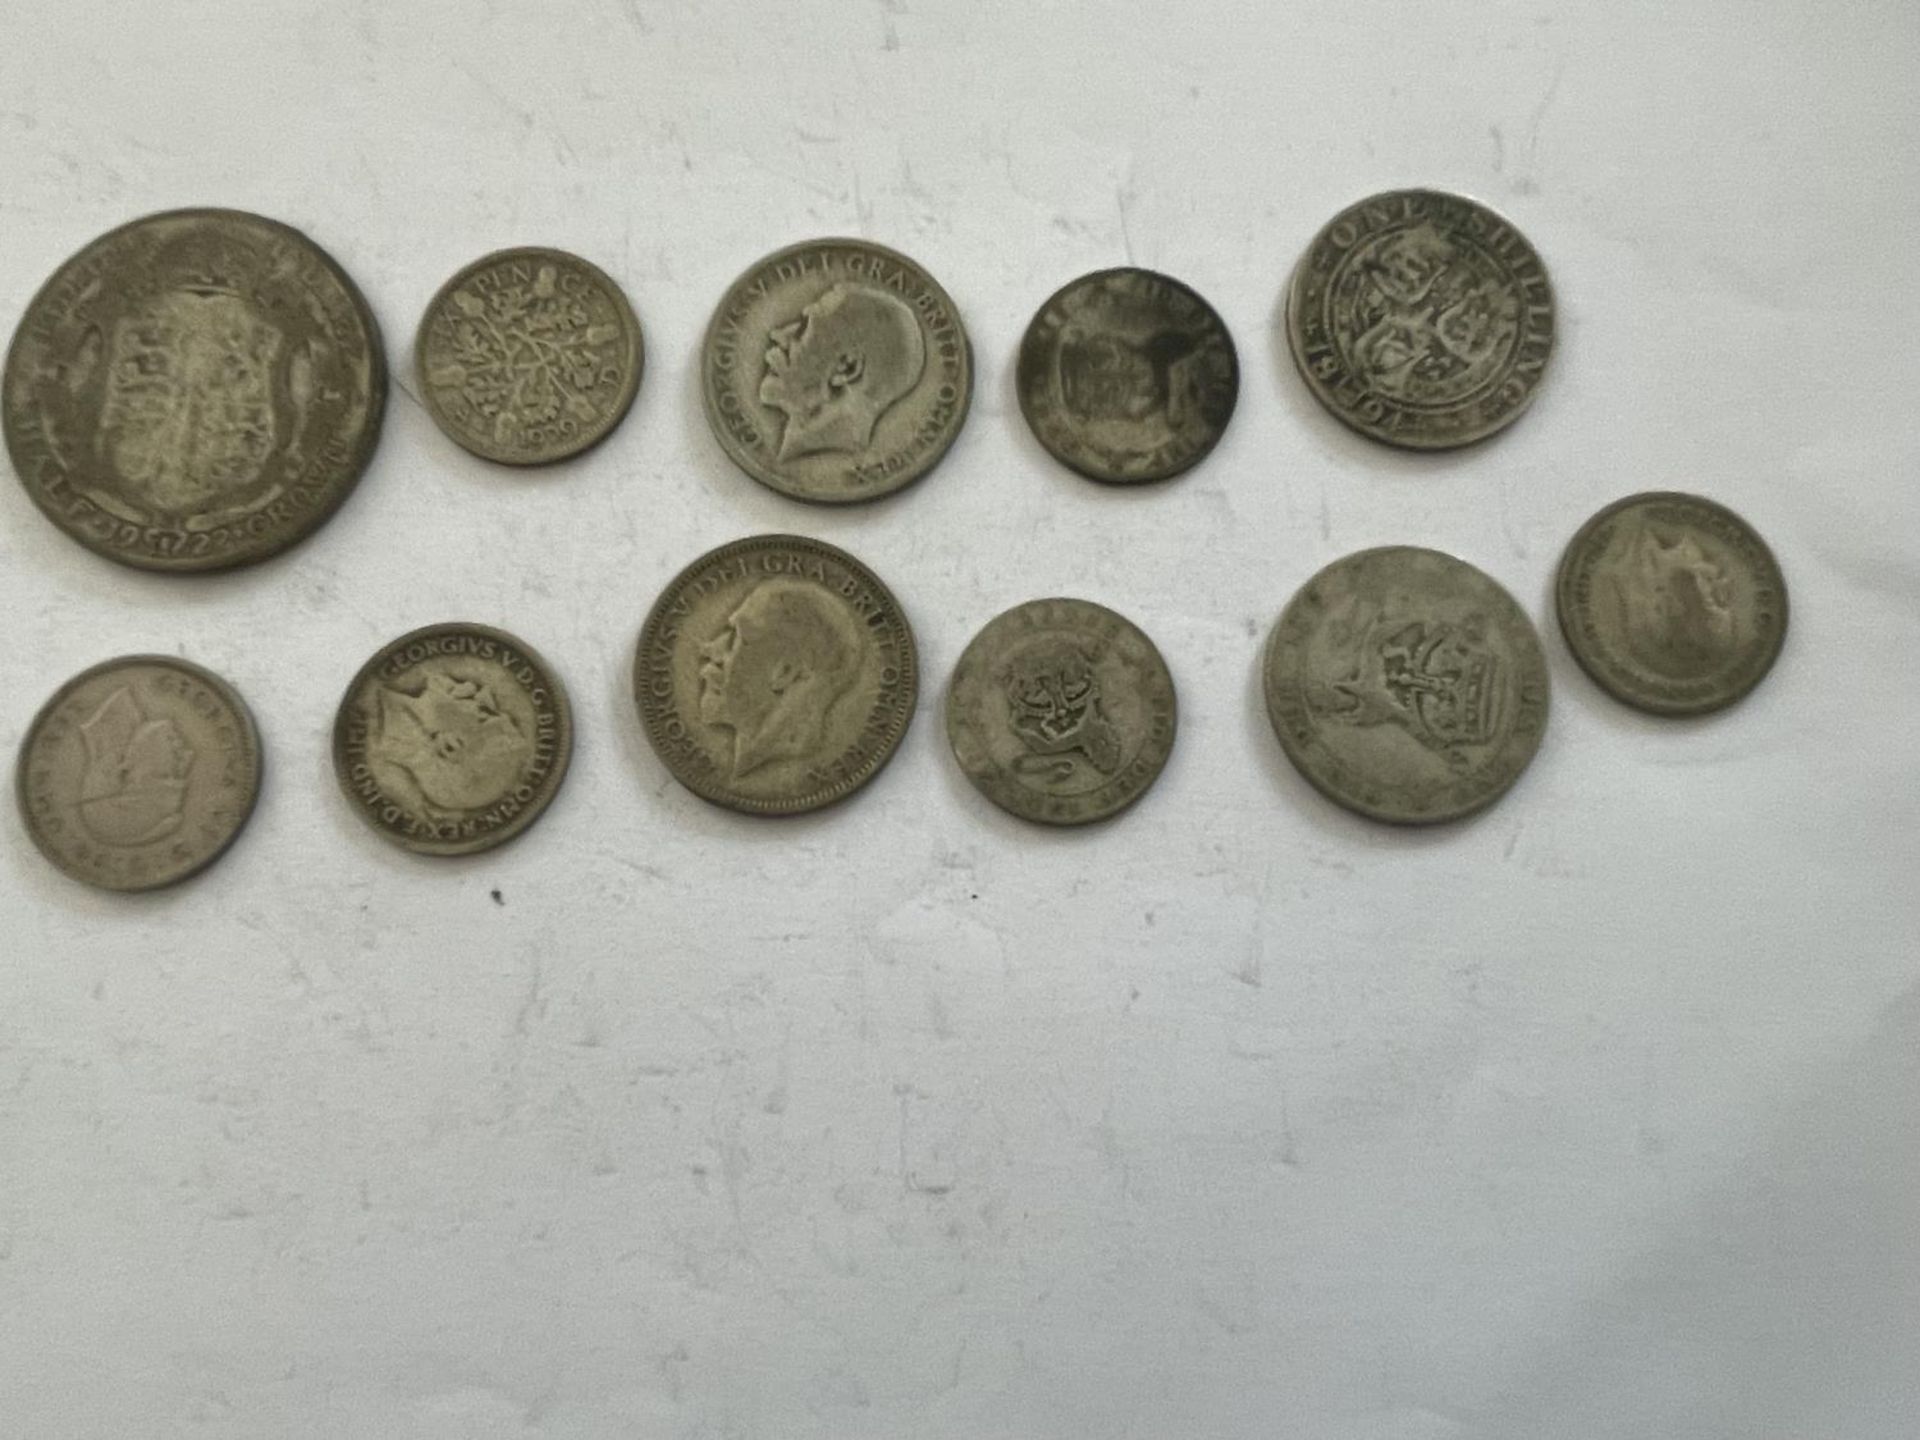 A 1922 HALF CROWN, FOUR PRE 1947 SHILLINGS AND SIX PRE 1947 SIXPENCES